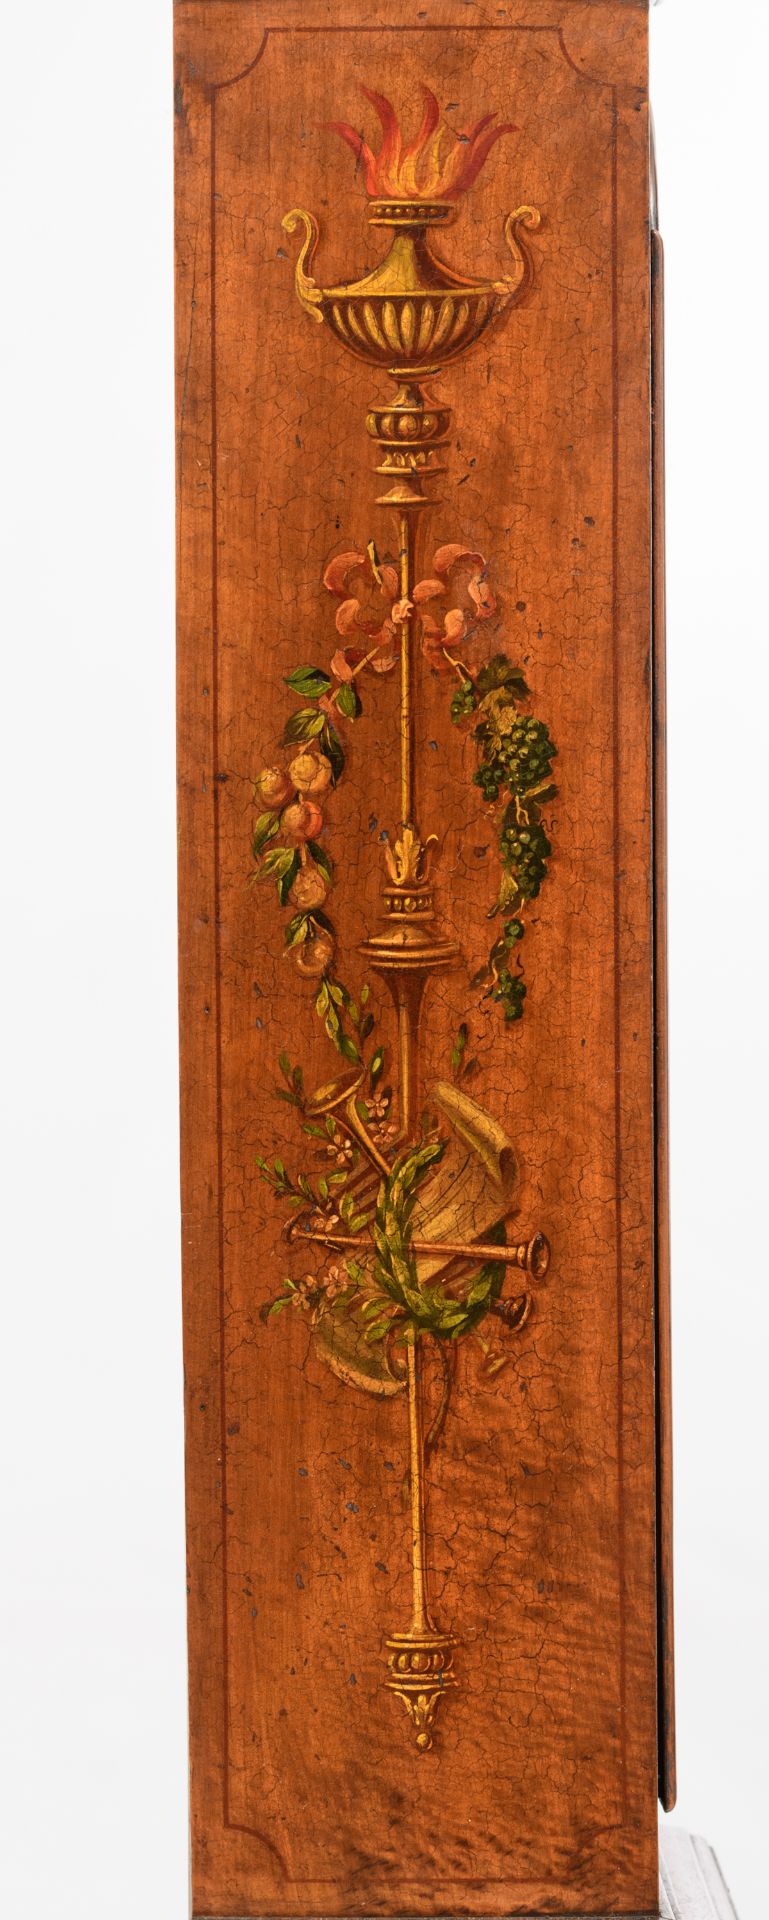 A fine mahogany veneered Victorian longcase clock, polychrome decorated with handpainted grotesques, - Image 11 of 15